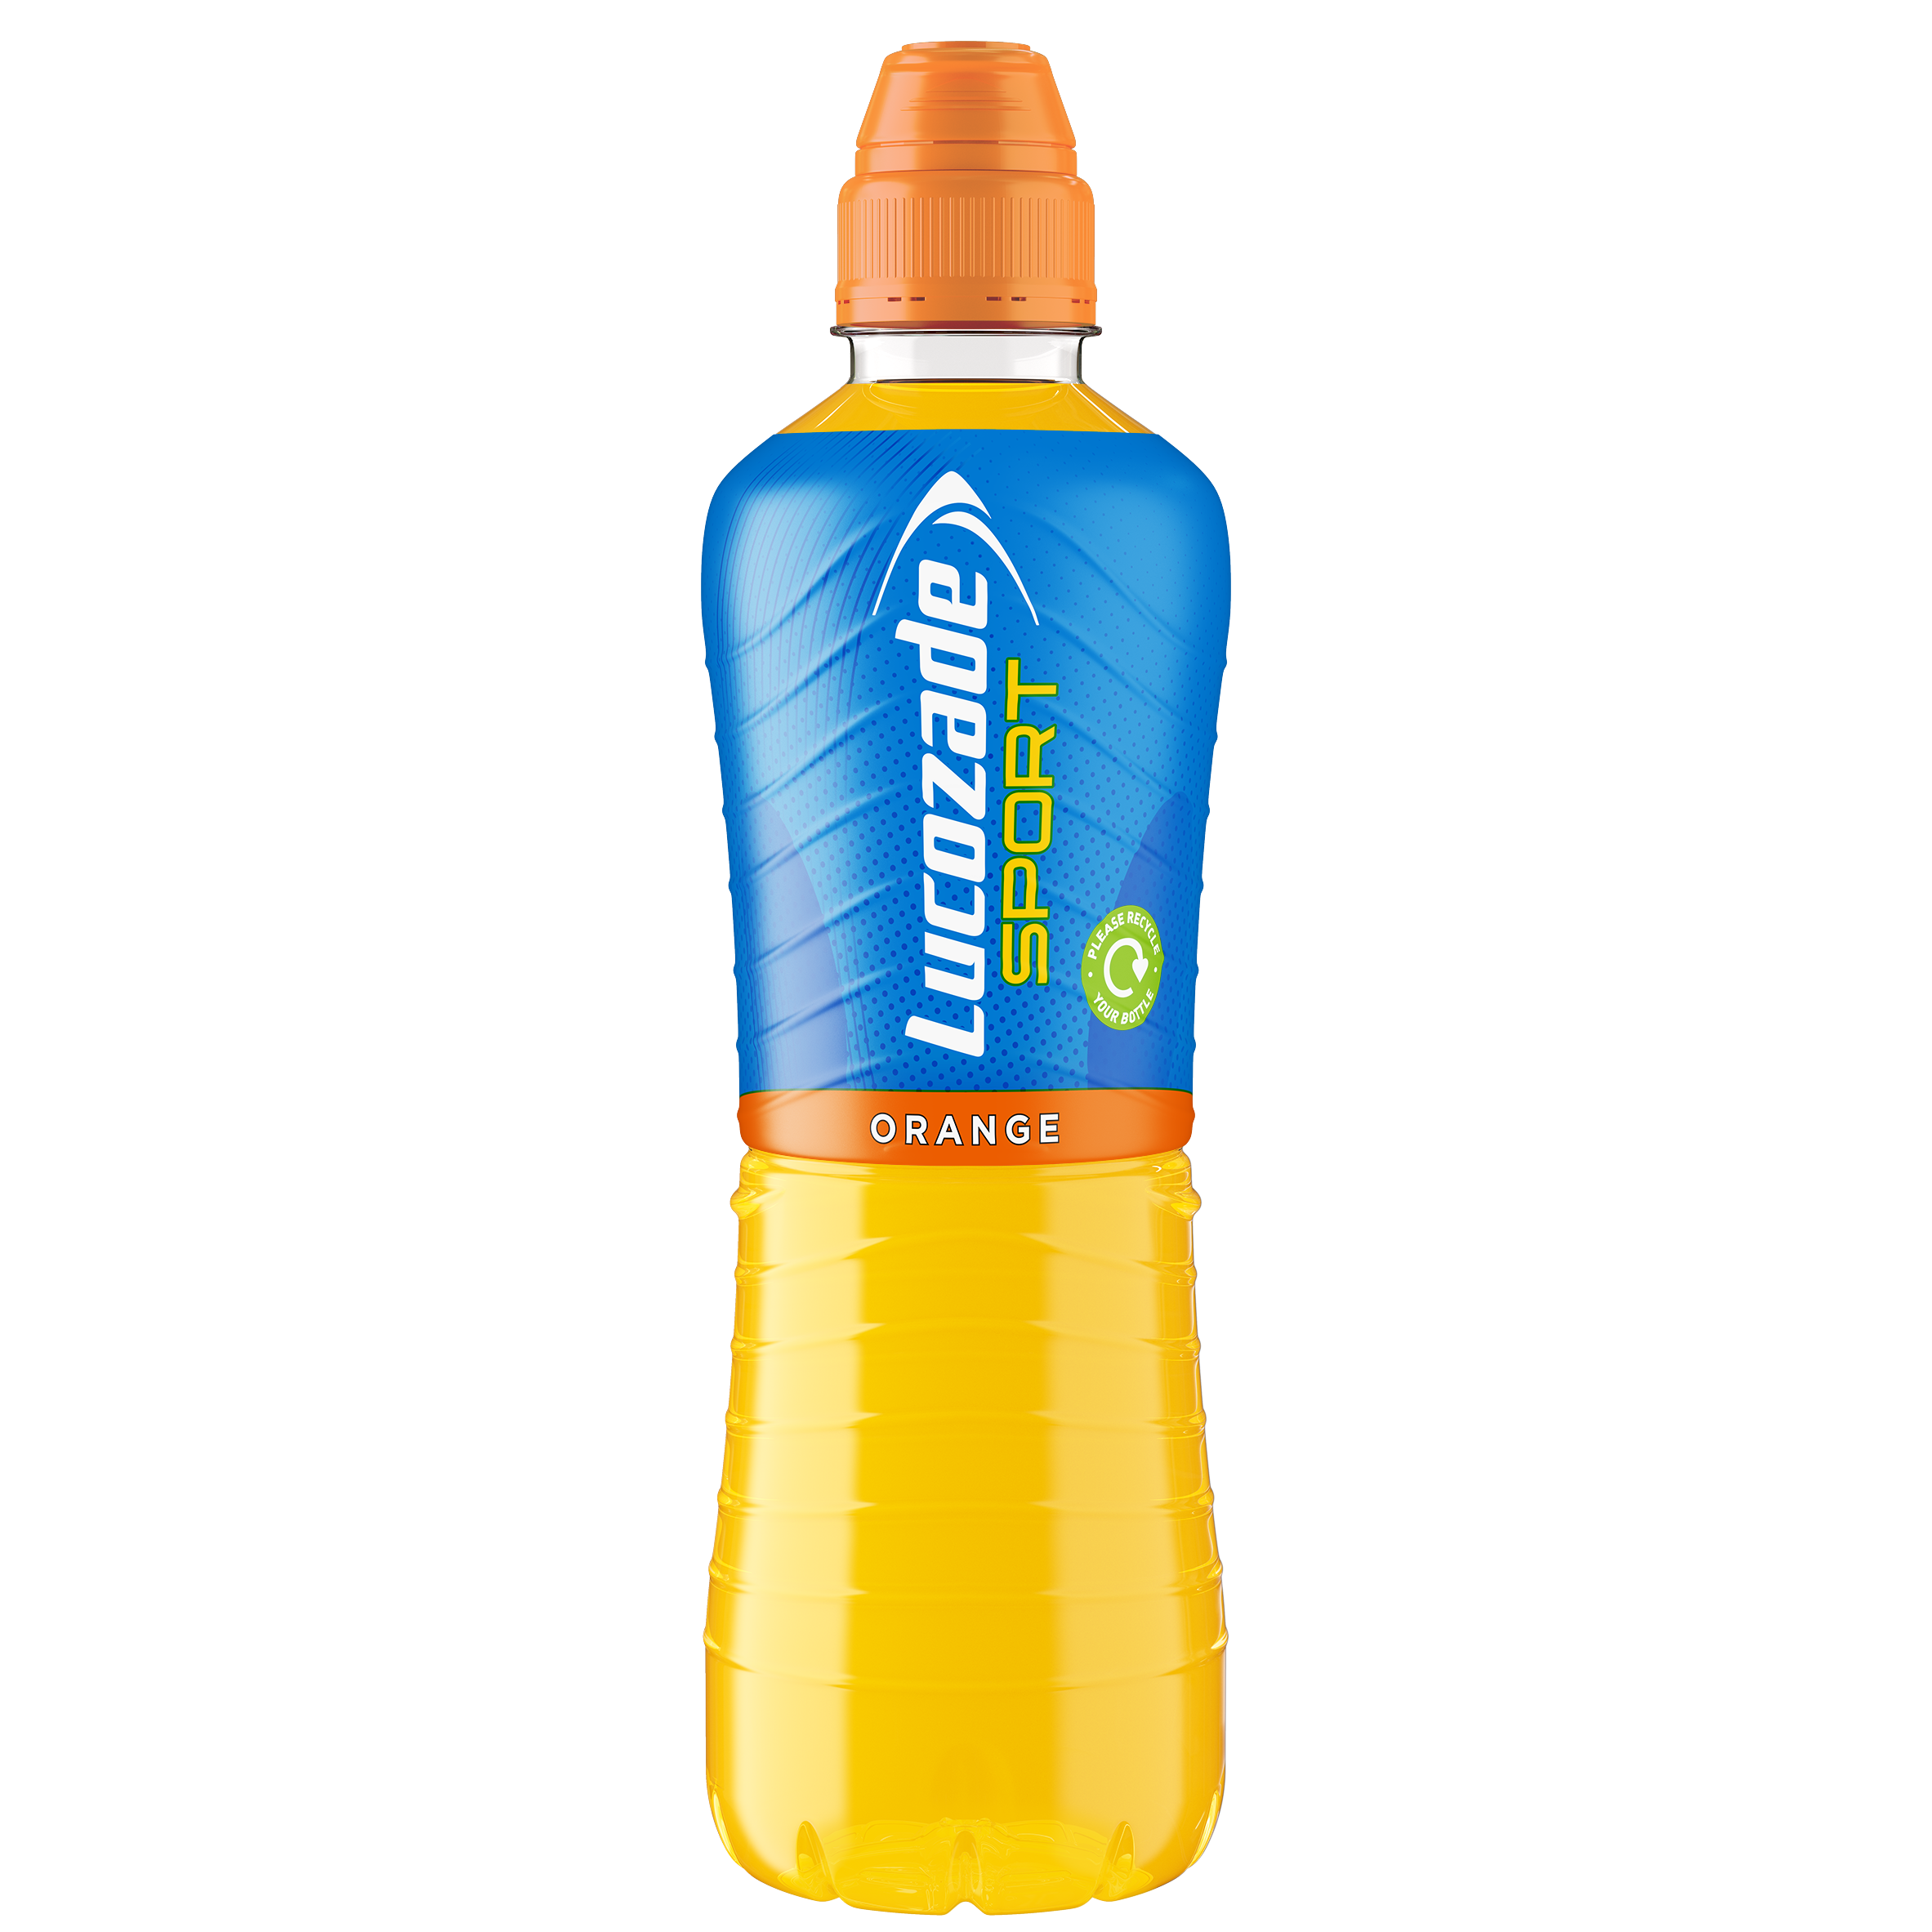 Lucozade Sport is official sports drink of 2022 Commonwealth Games